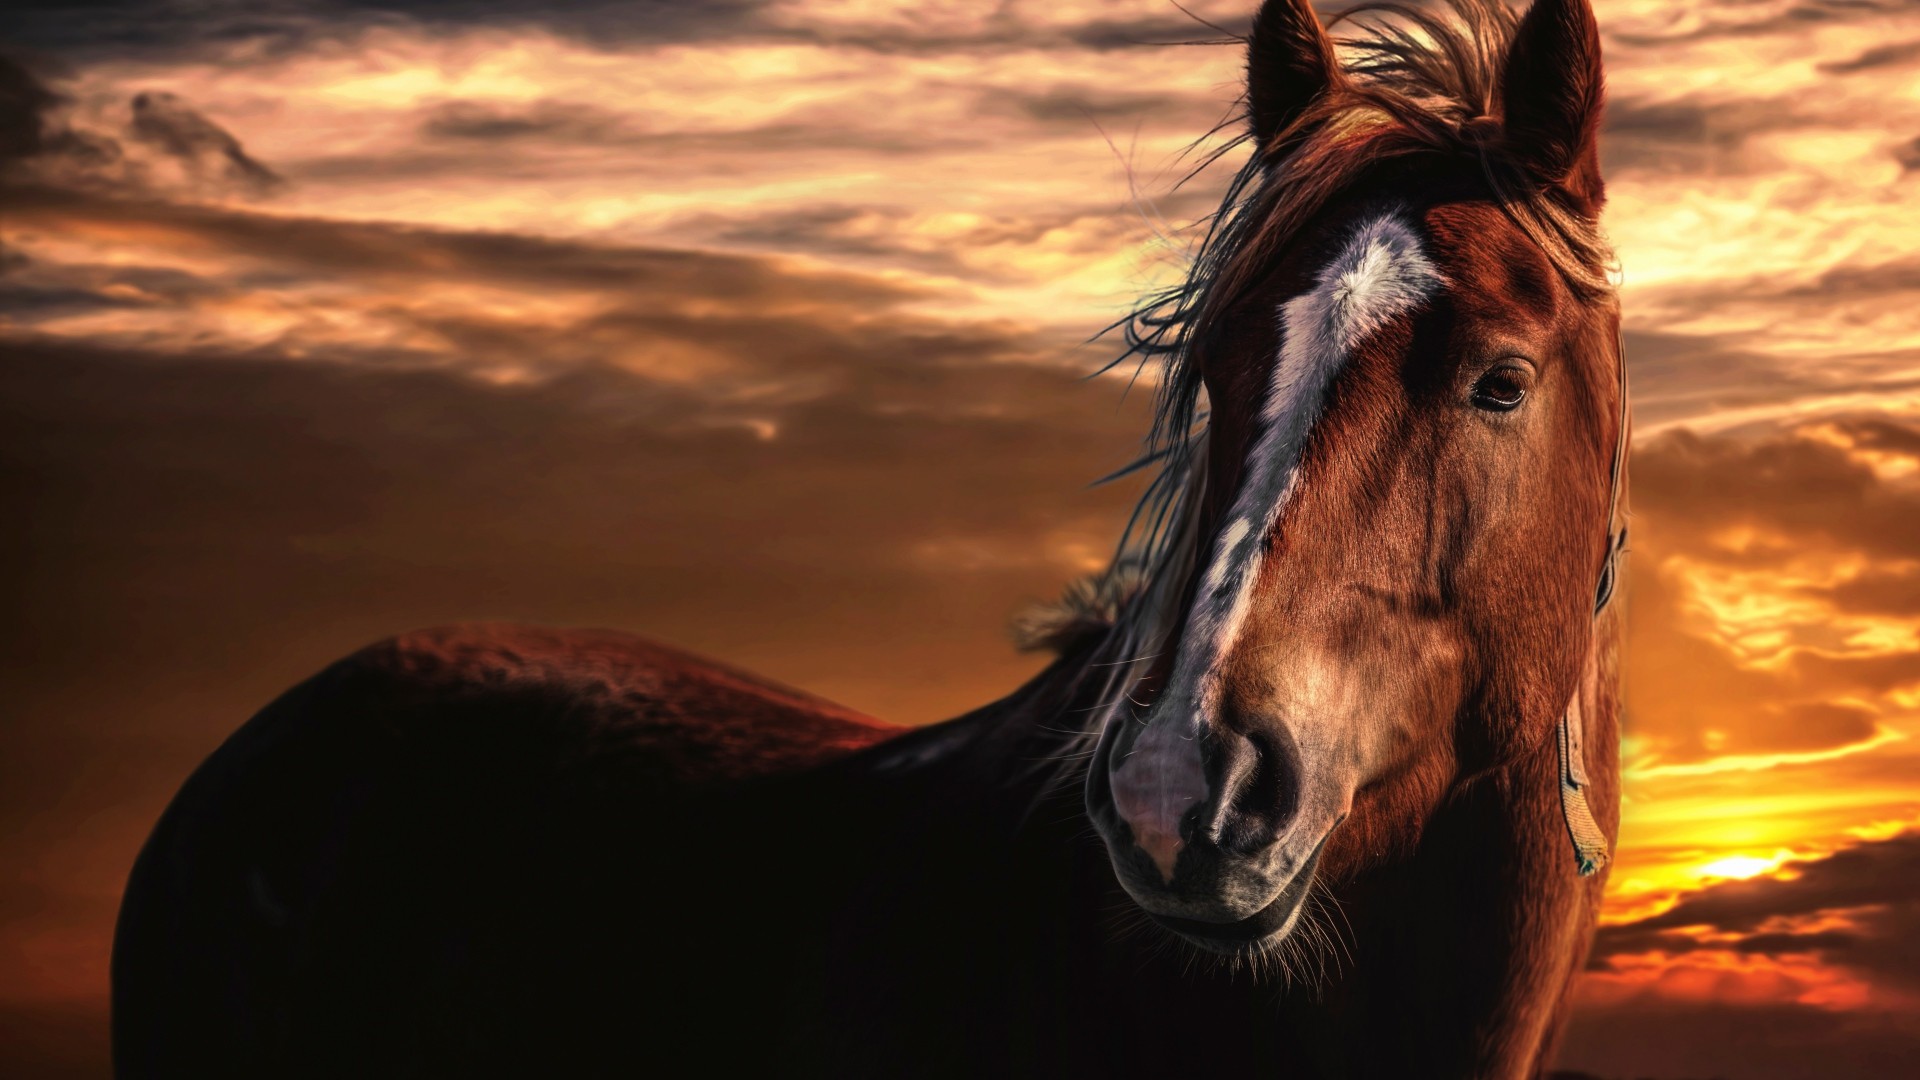 1920x1080 Download now full hd wallpaper horse sunset powerful ...